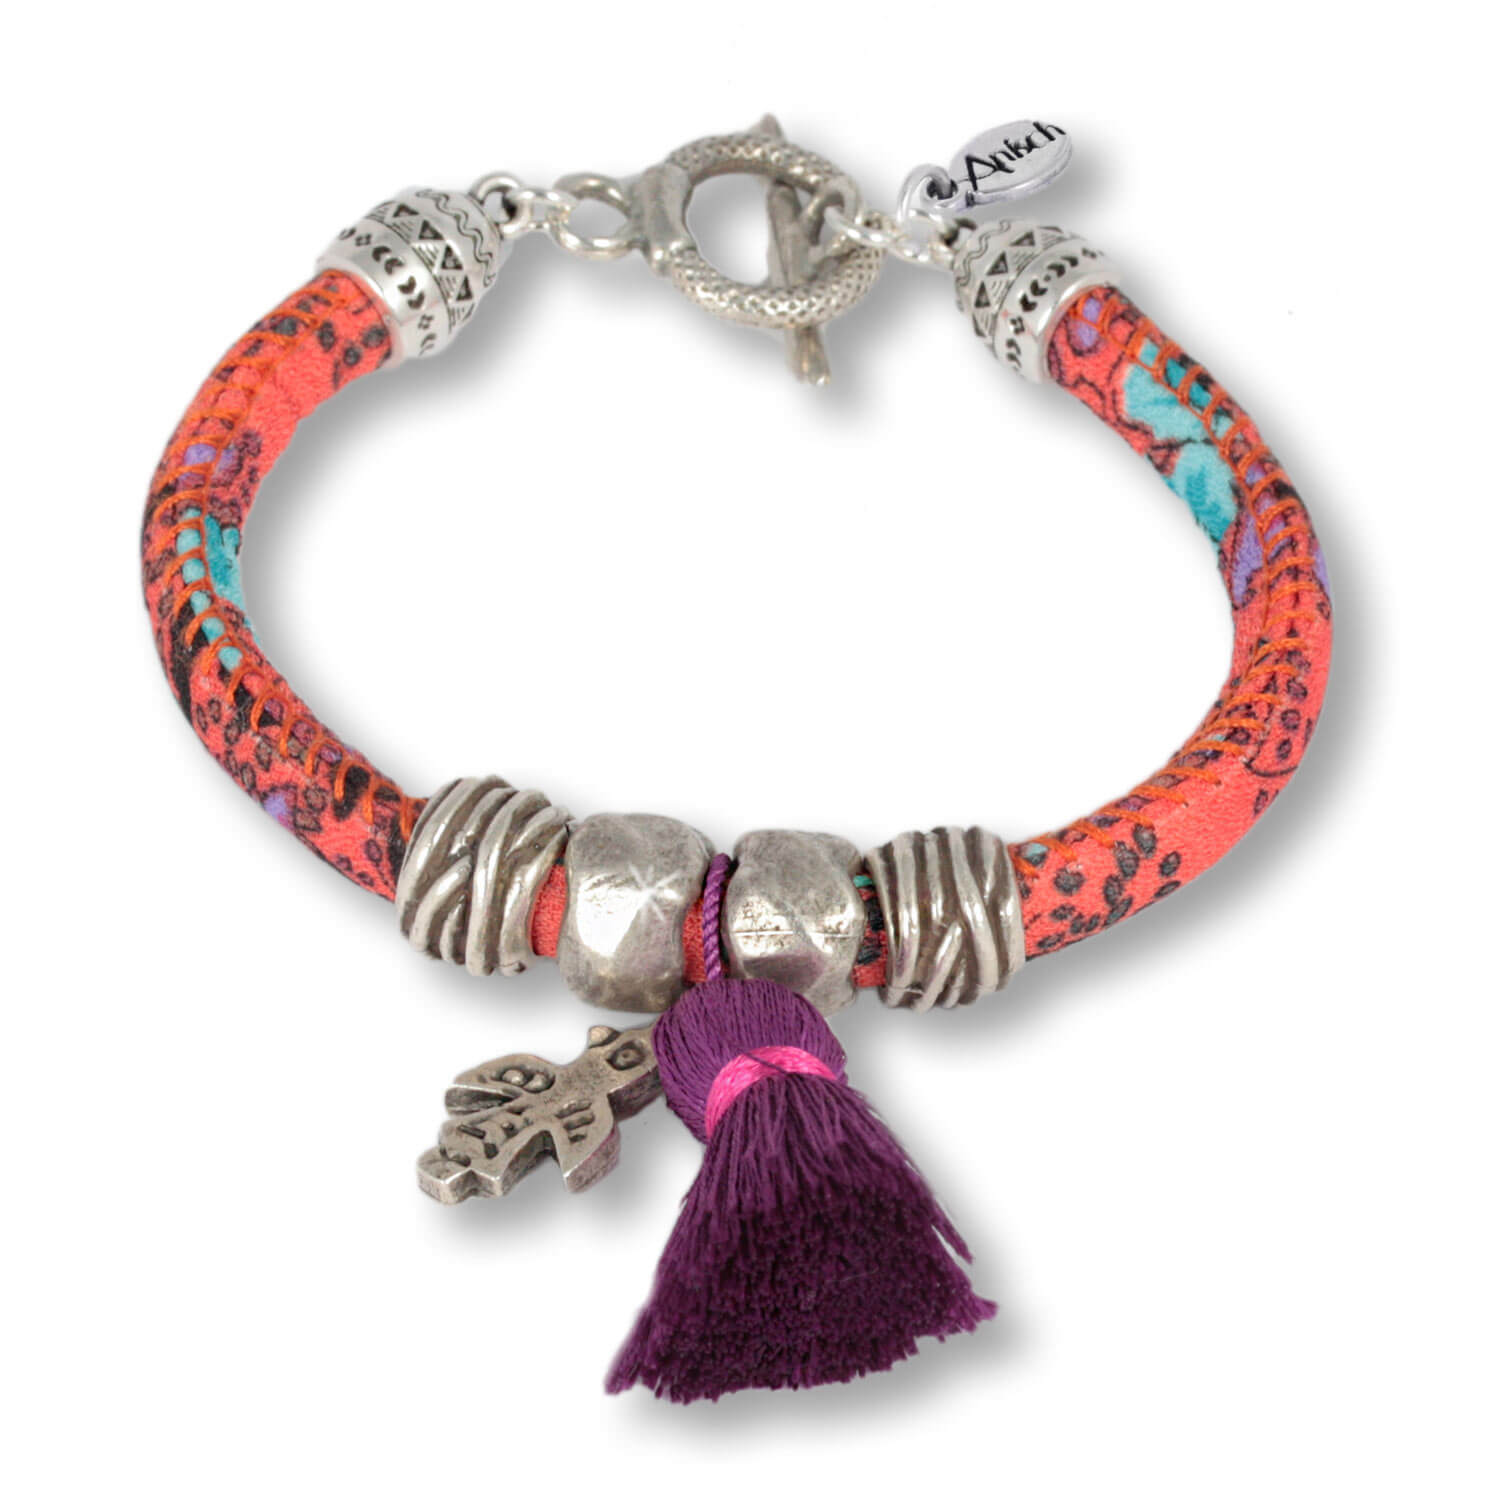 Fire Eagle- Ethno bracelet with traditional patterns